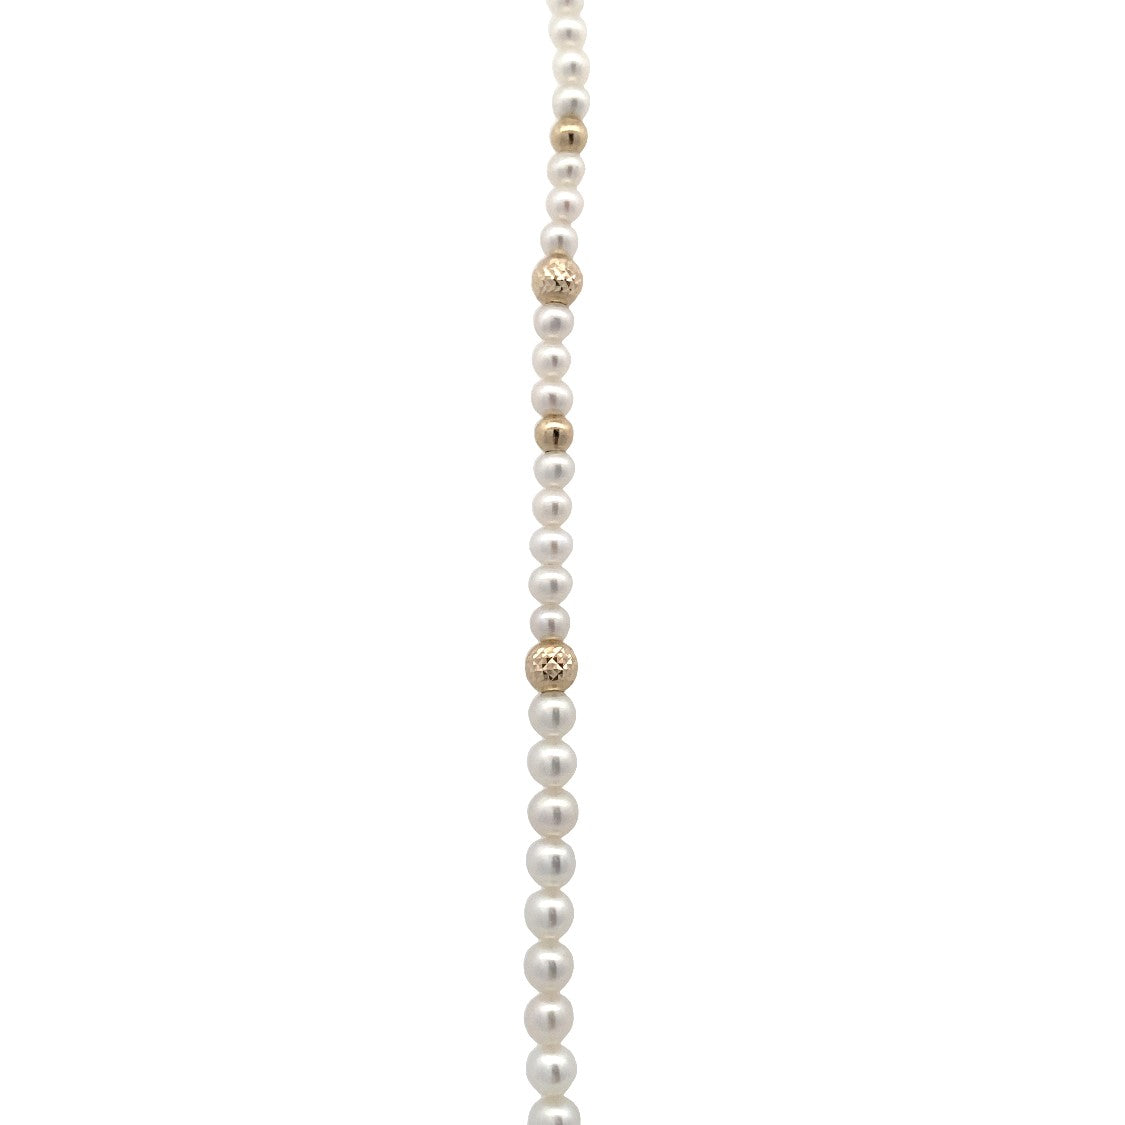 Beeghly & Co. 14 Karat Opera 26-36" Pearl Necklace